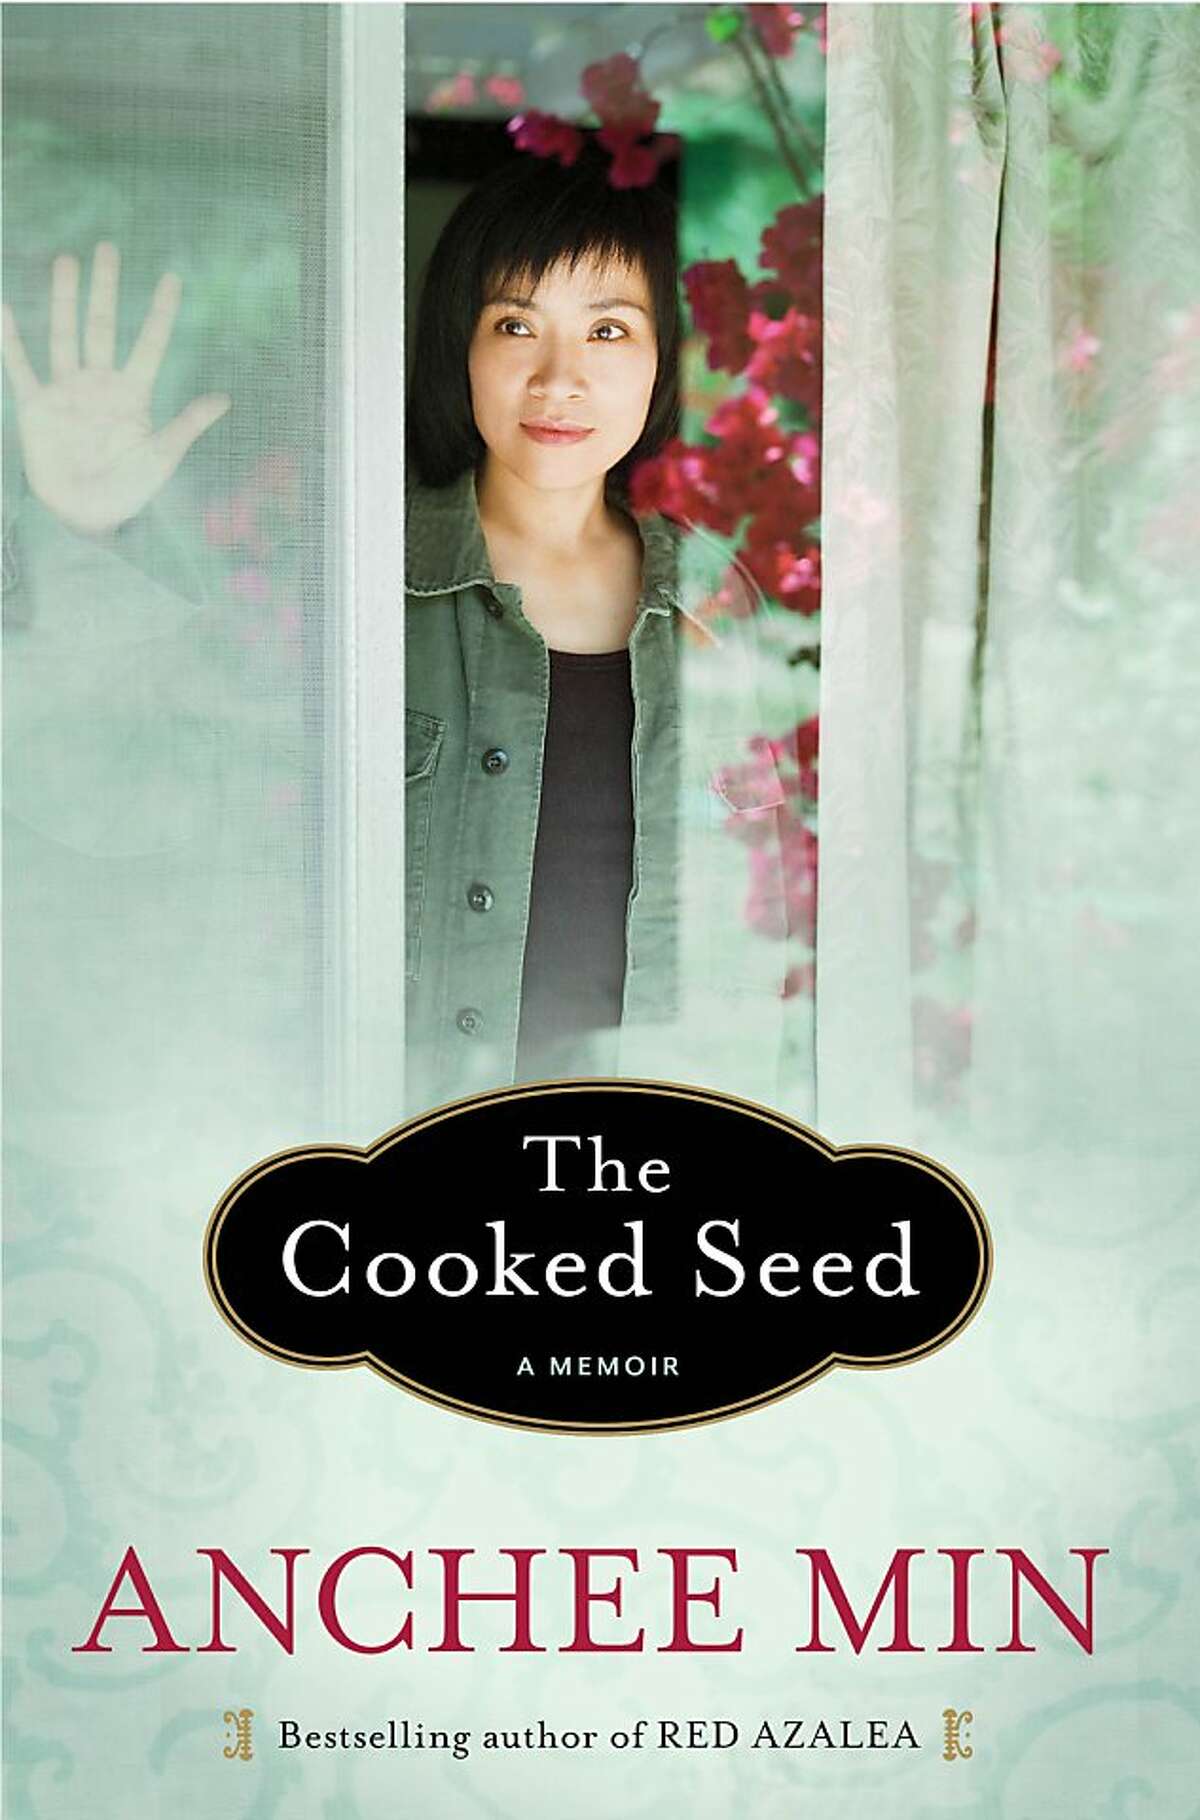 The Cooked Seed, by Anchee Min